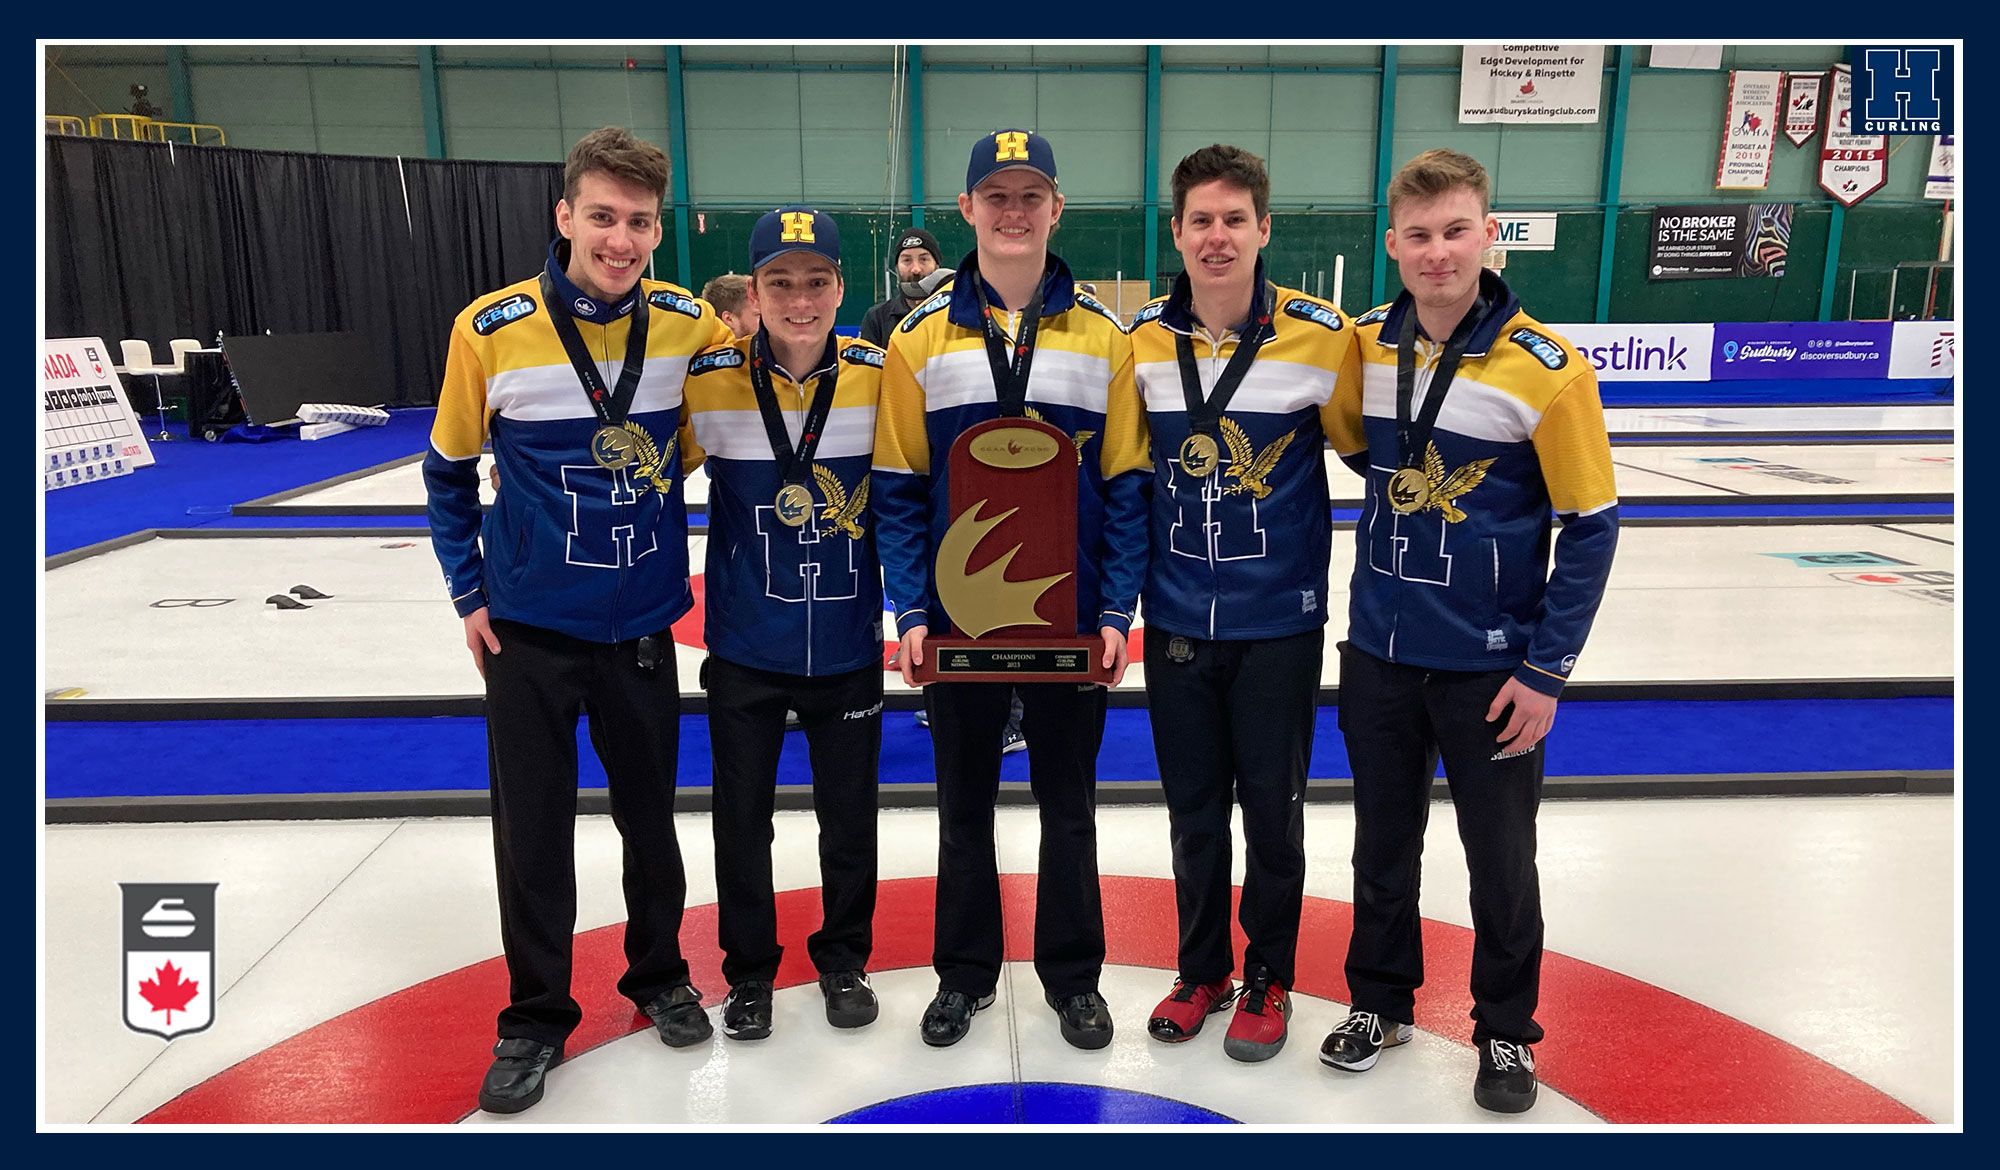 Men's curling team posing with the trophy